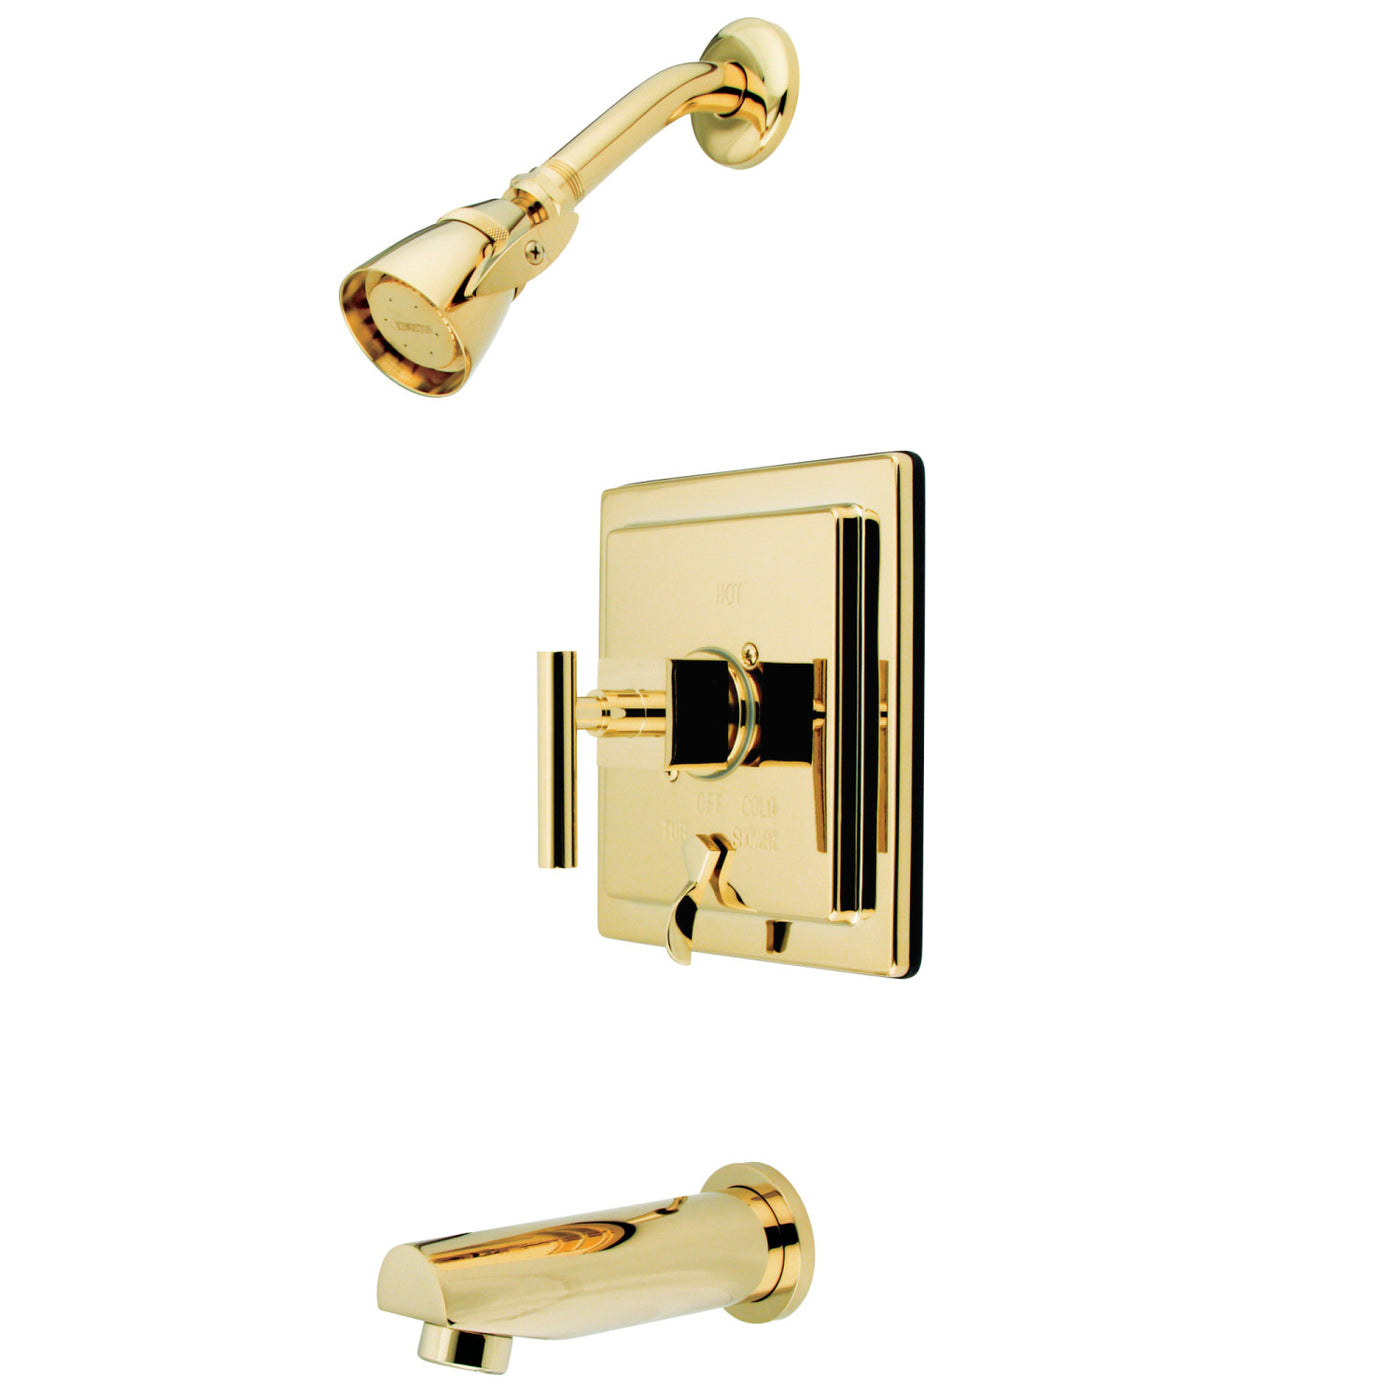 Elements of Design EB86520CQL Tub and Shower Faucet, Polished Brass